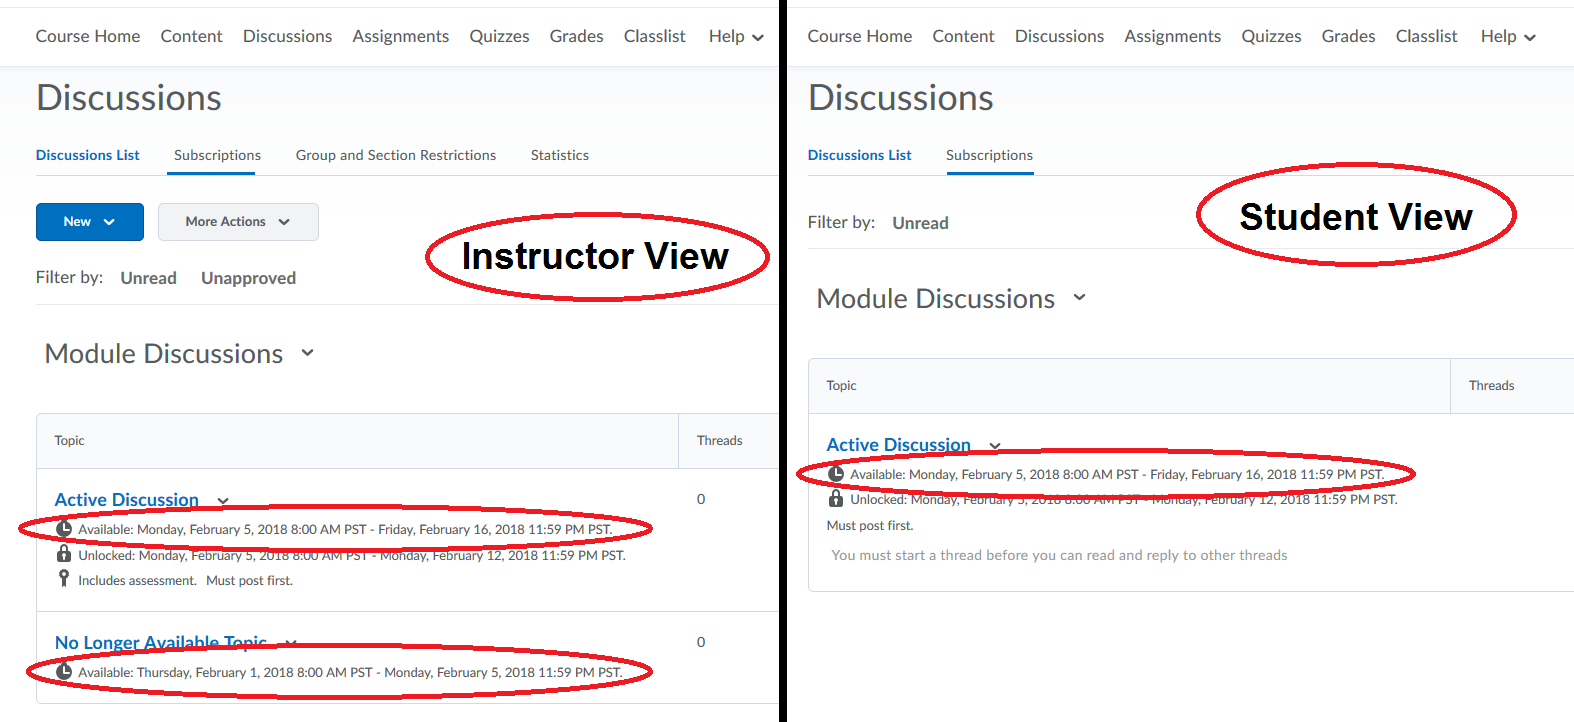 image that is split in half showing the instructor view on the left hand side with two topics, each showing an availability date range below the title of the topics. The right side shows the student perspective with only one topic showing as the second topic is not within its availability range.